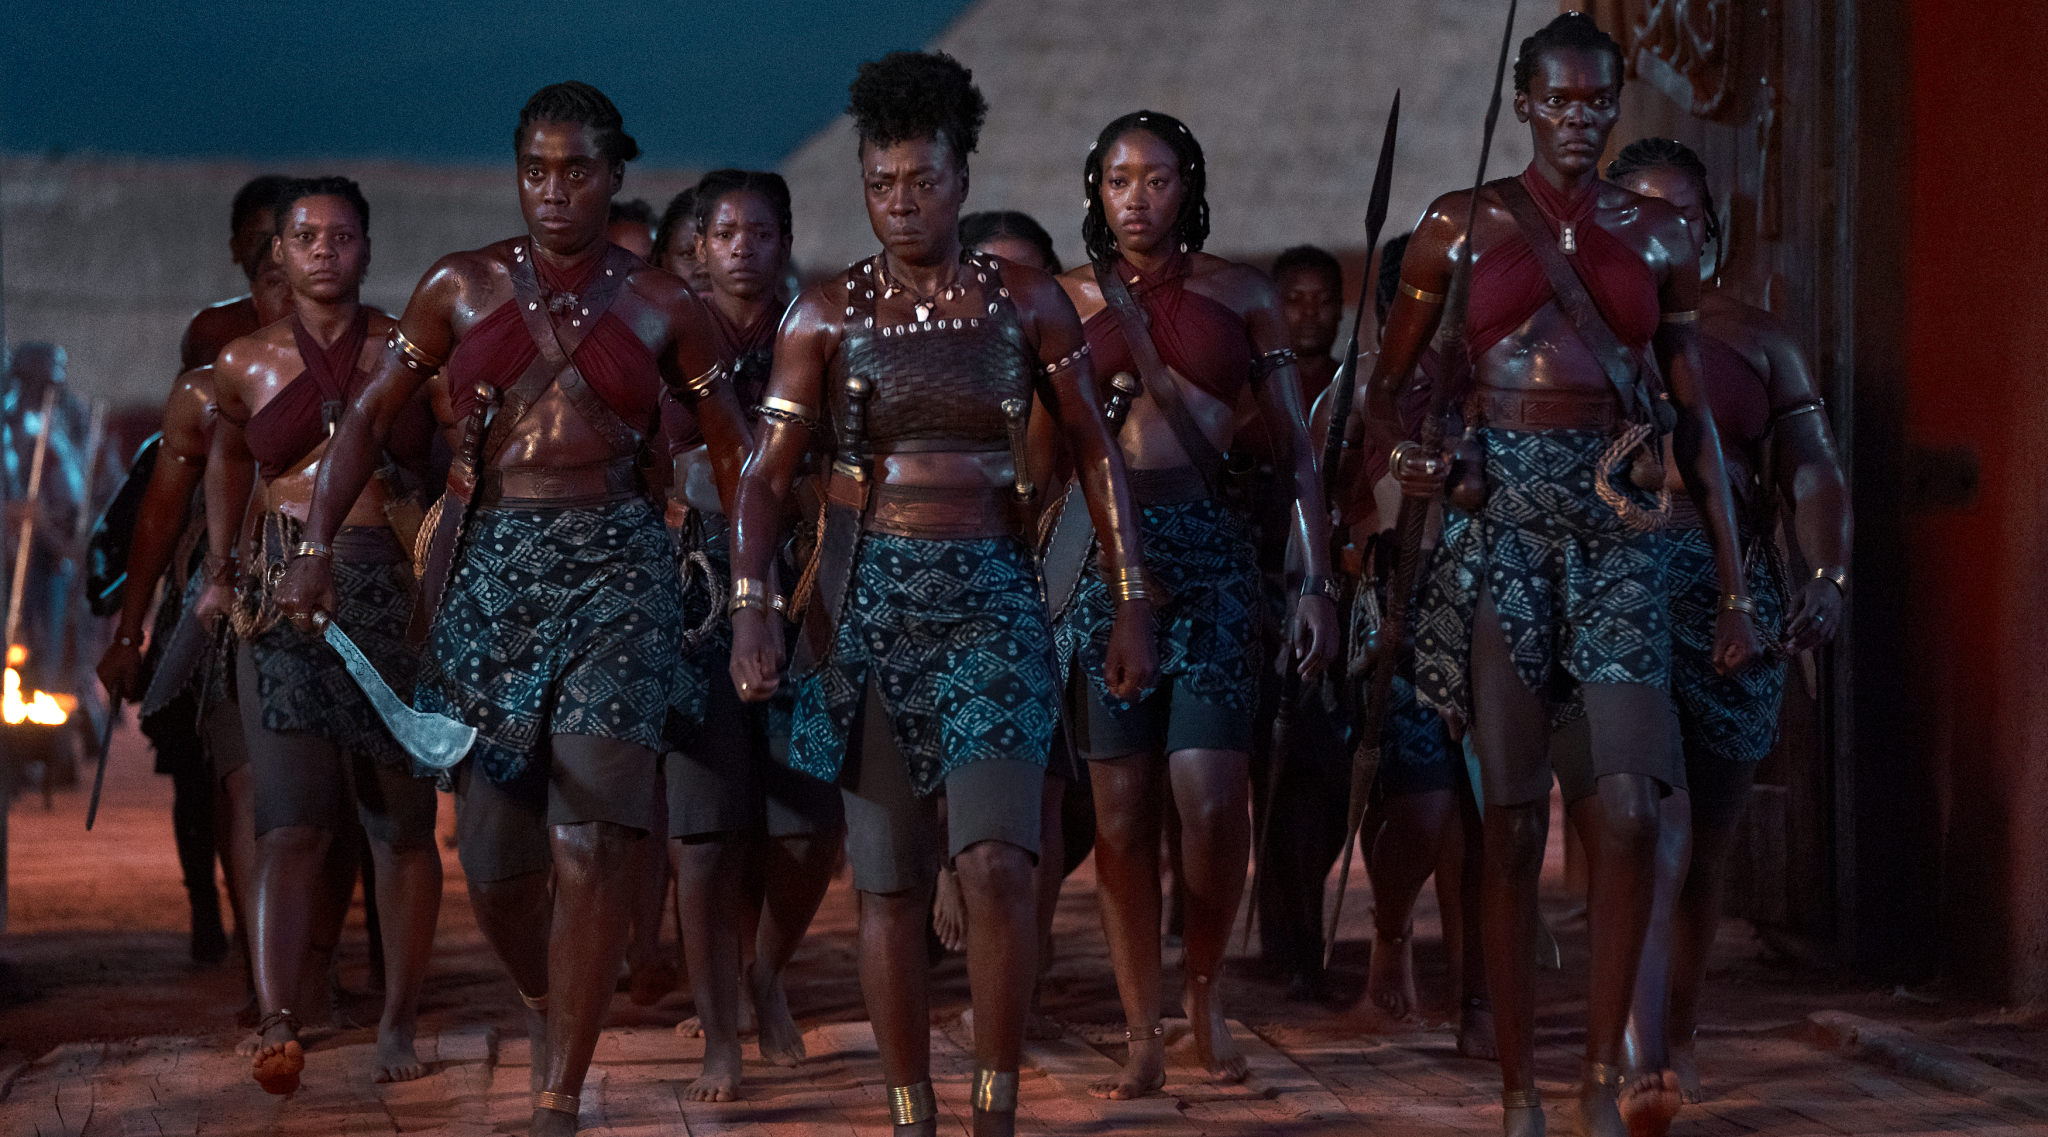 Viola Davis Leads an Army of Female Warriors in 'The Woman King' Trailer